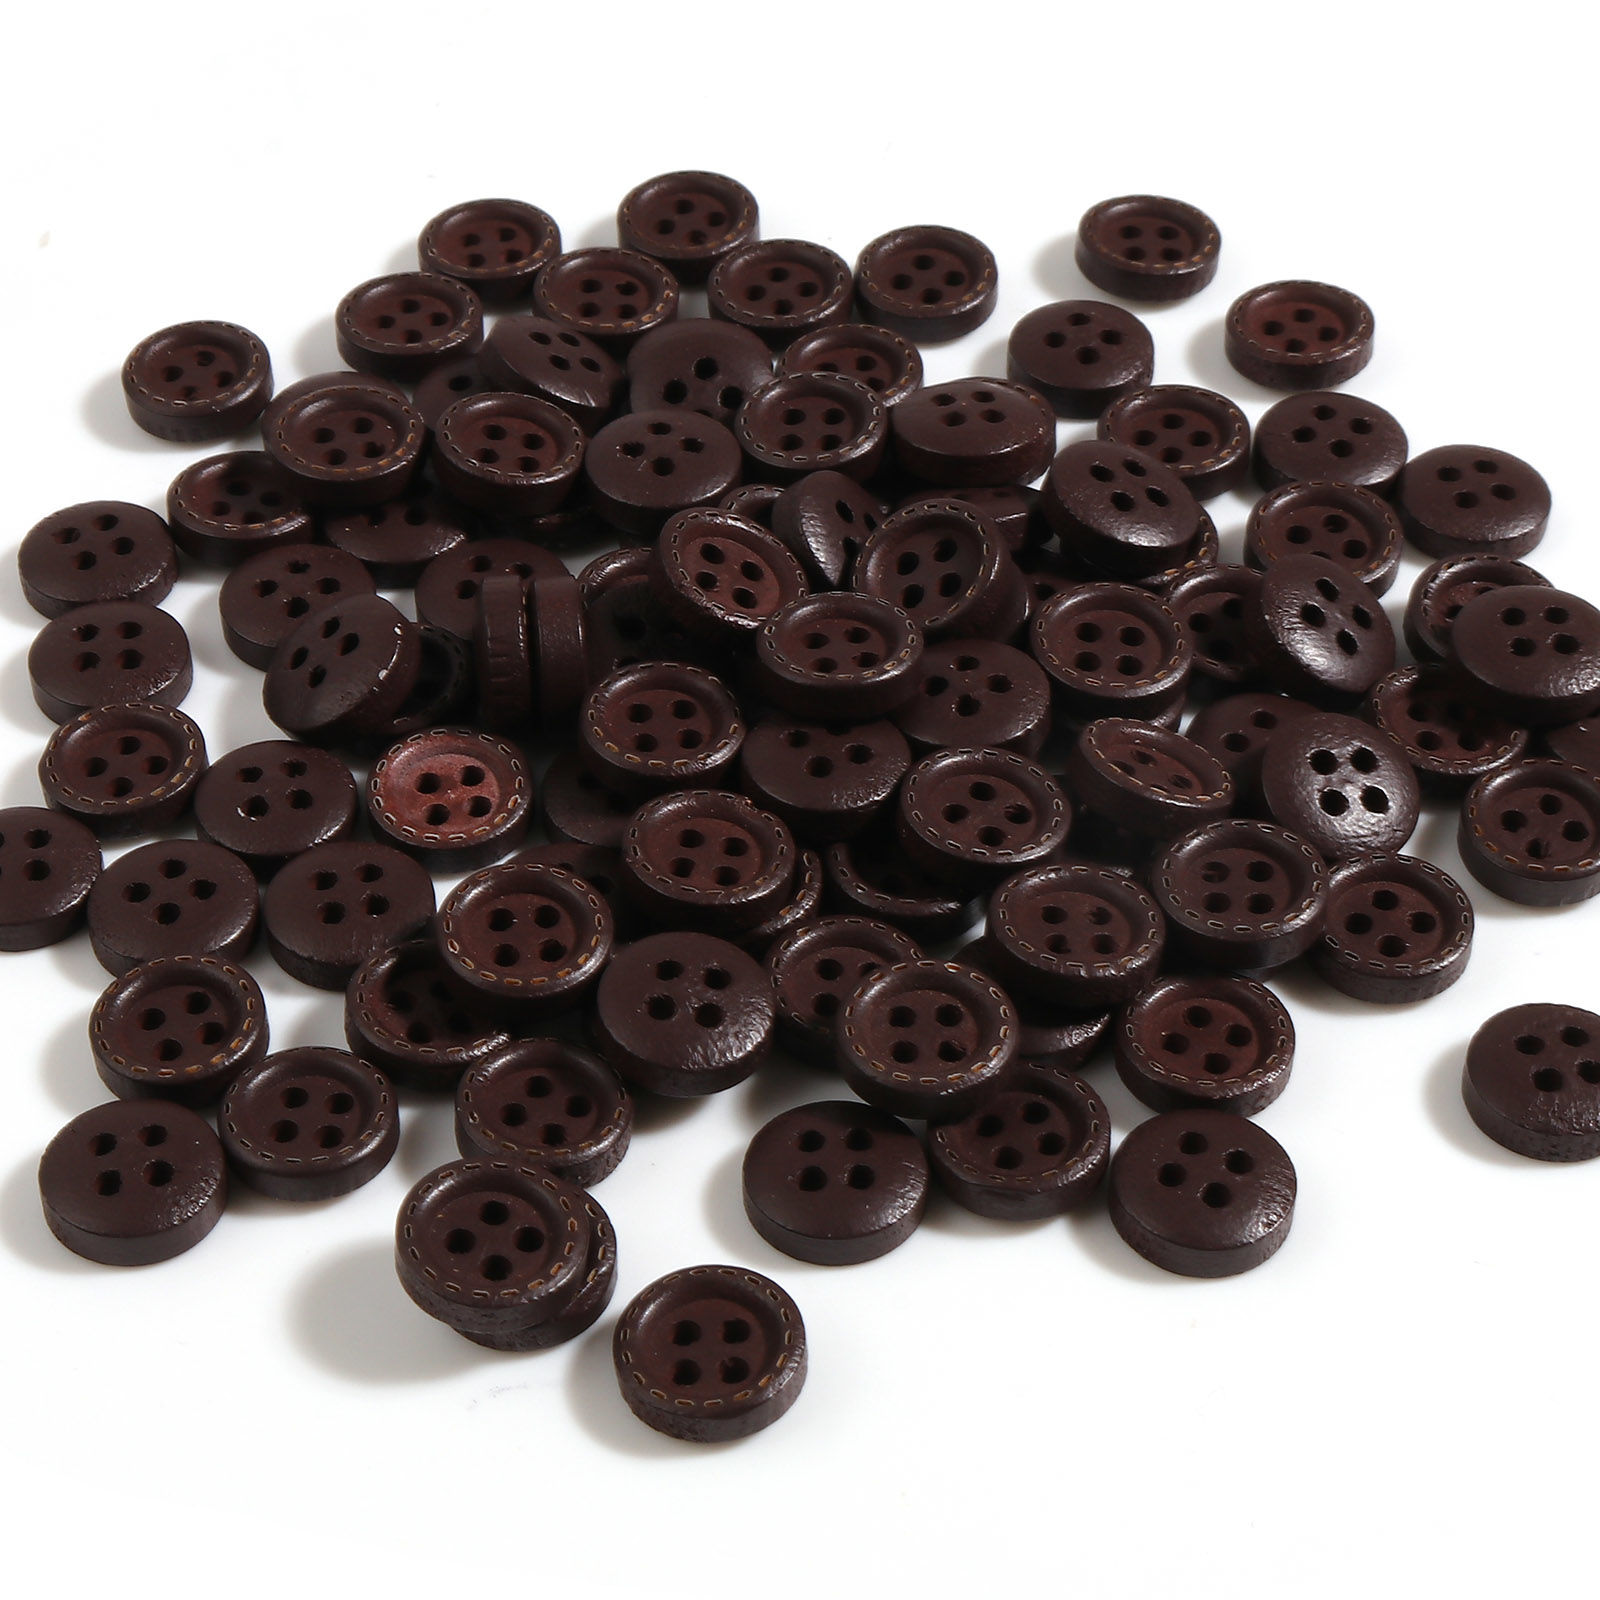 Picture of Wood Sewing Buttons Scrapbooking 4 Holes Round Dark Coffee 10mm Dia., 100 PCs